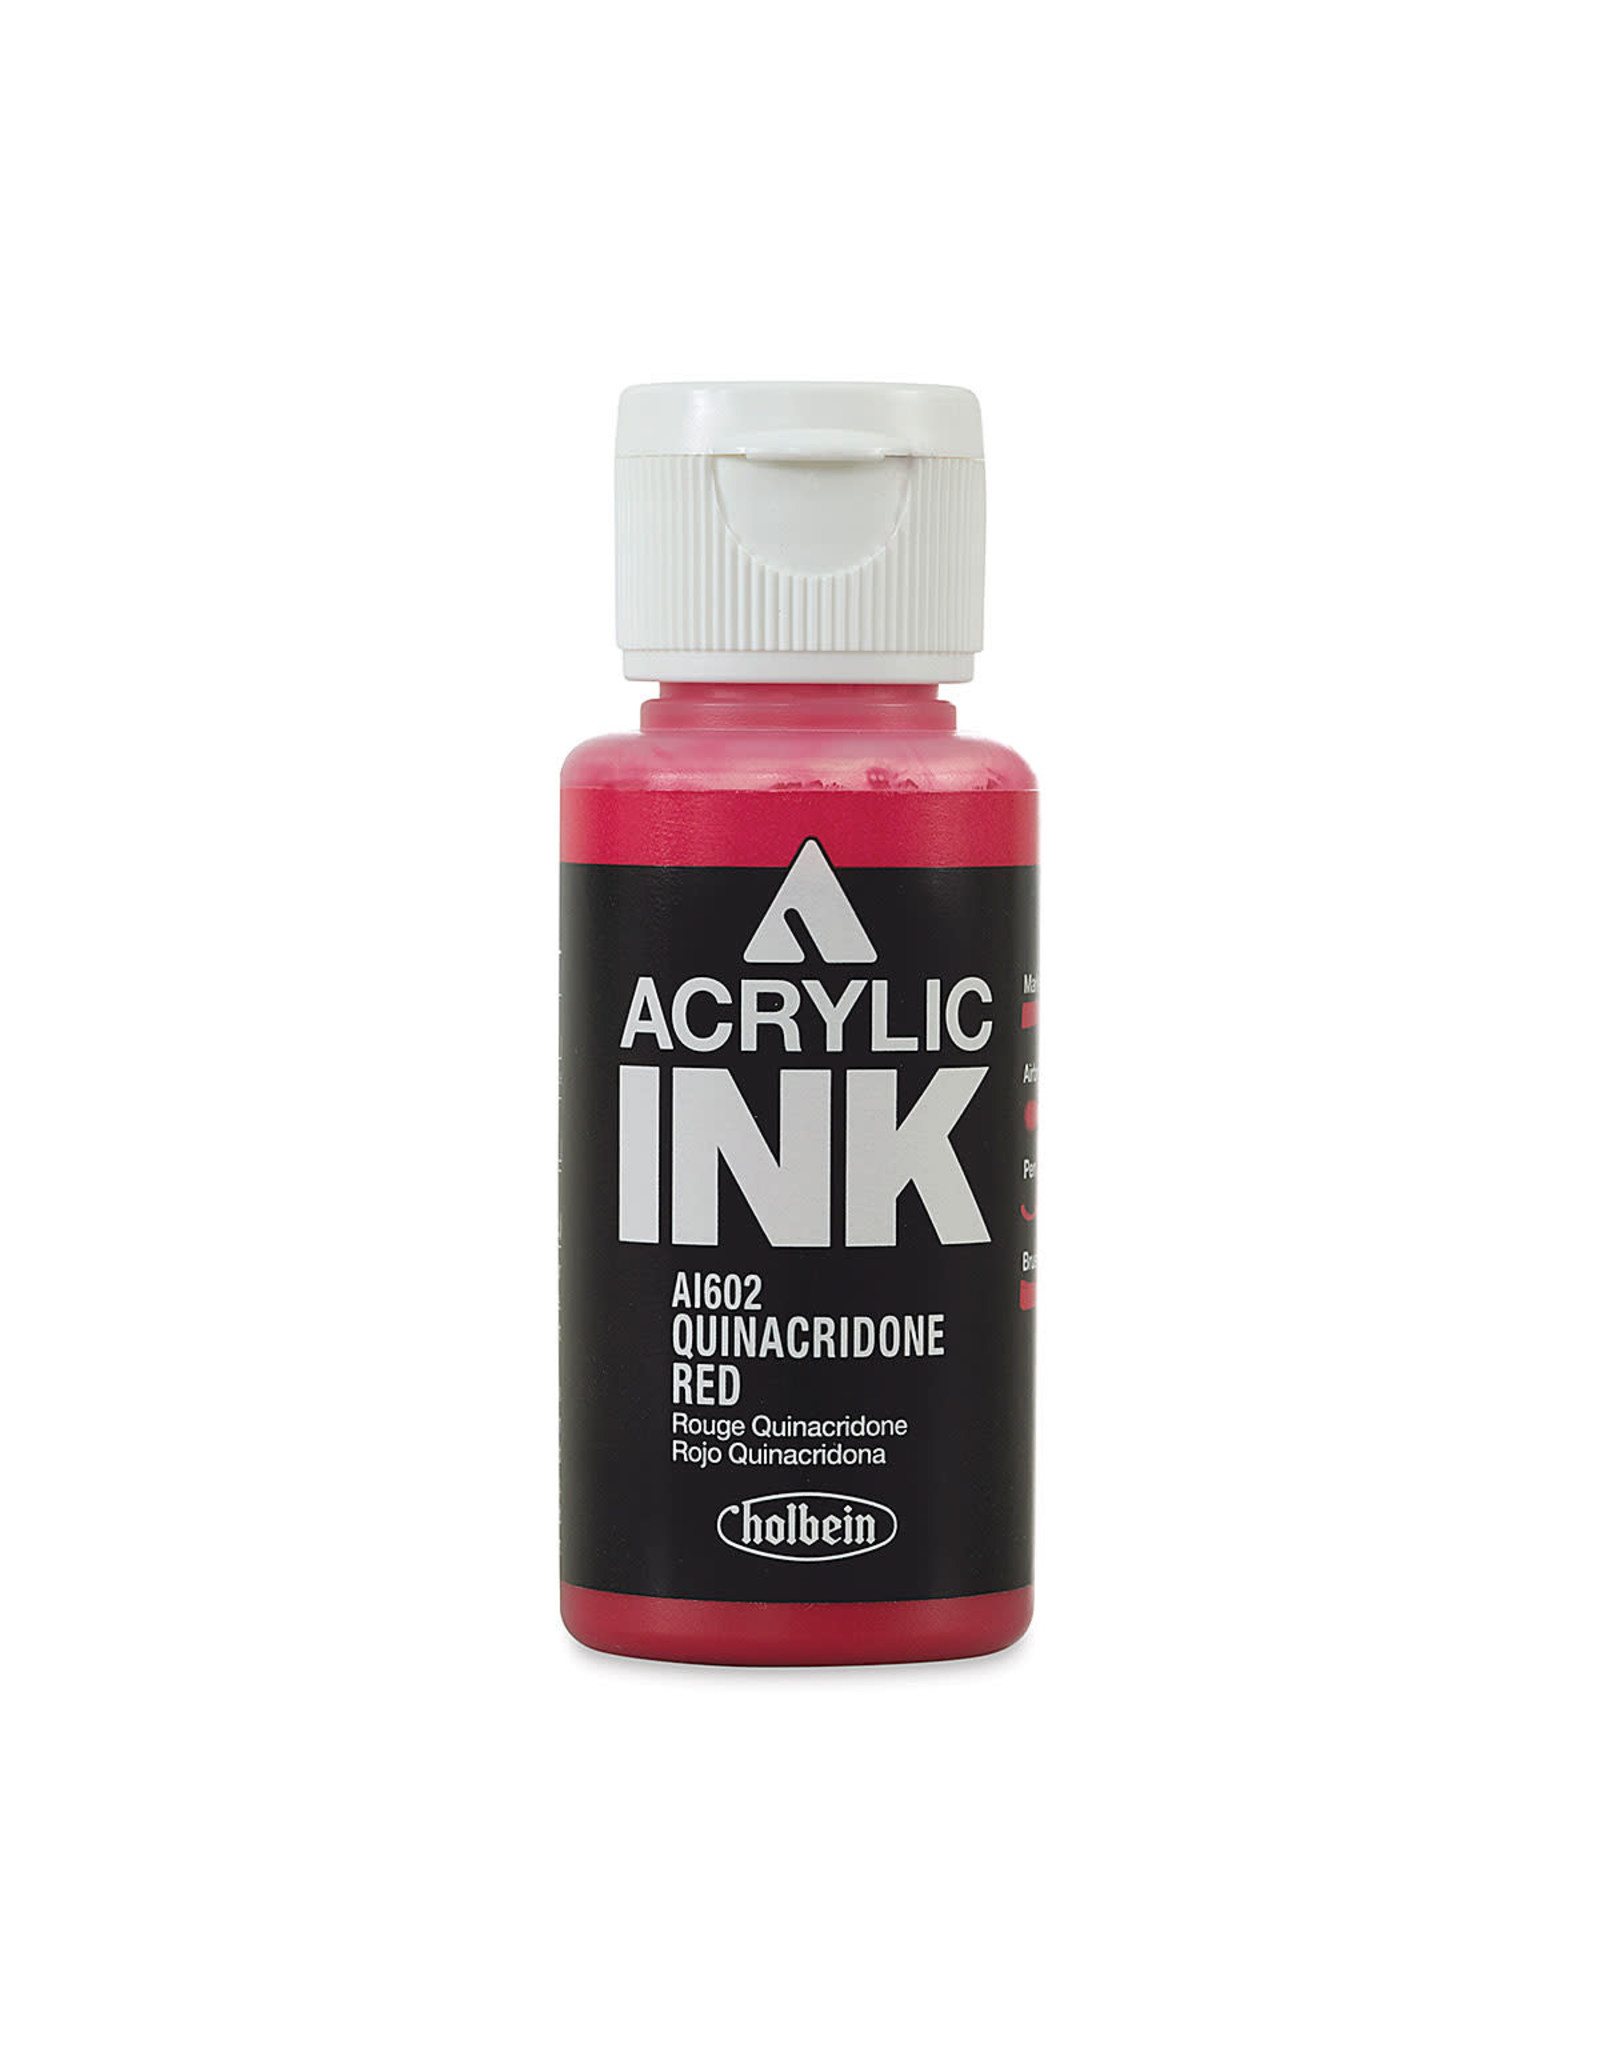 CLEARANCE Holbein Acrylic Ink, Quinacridone Red, 30ml